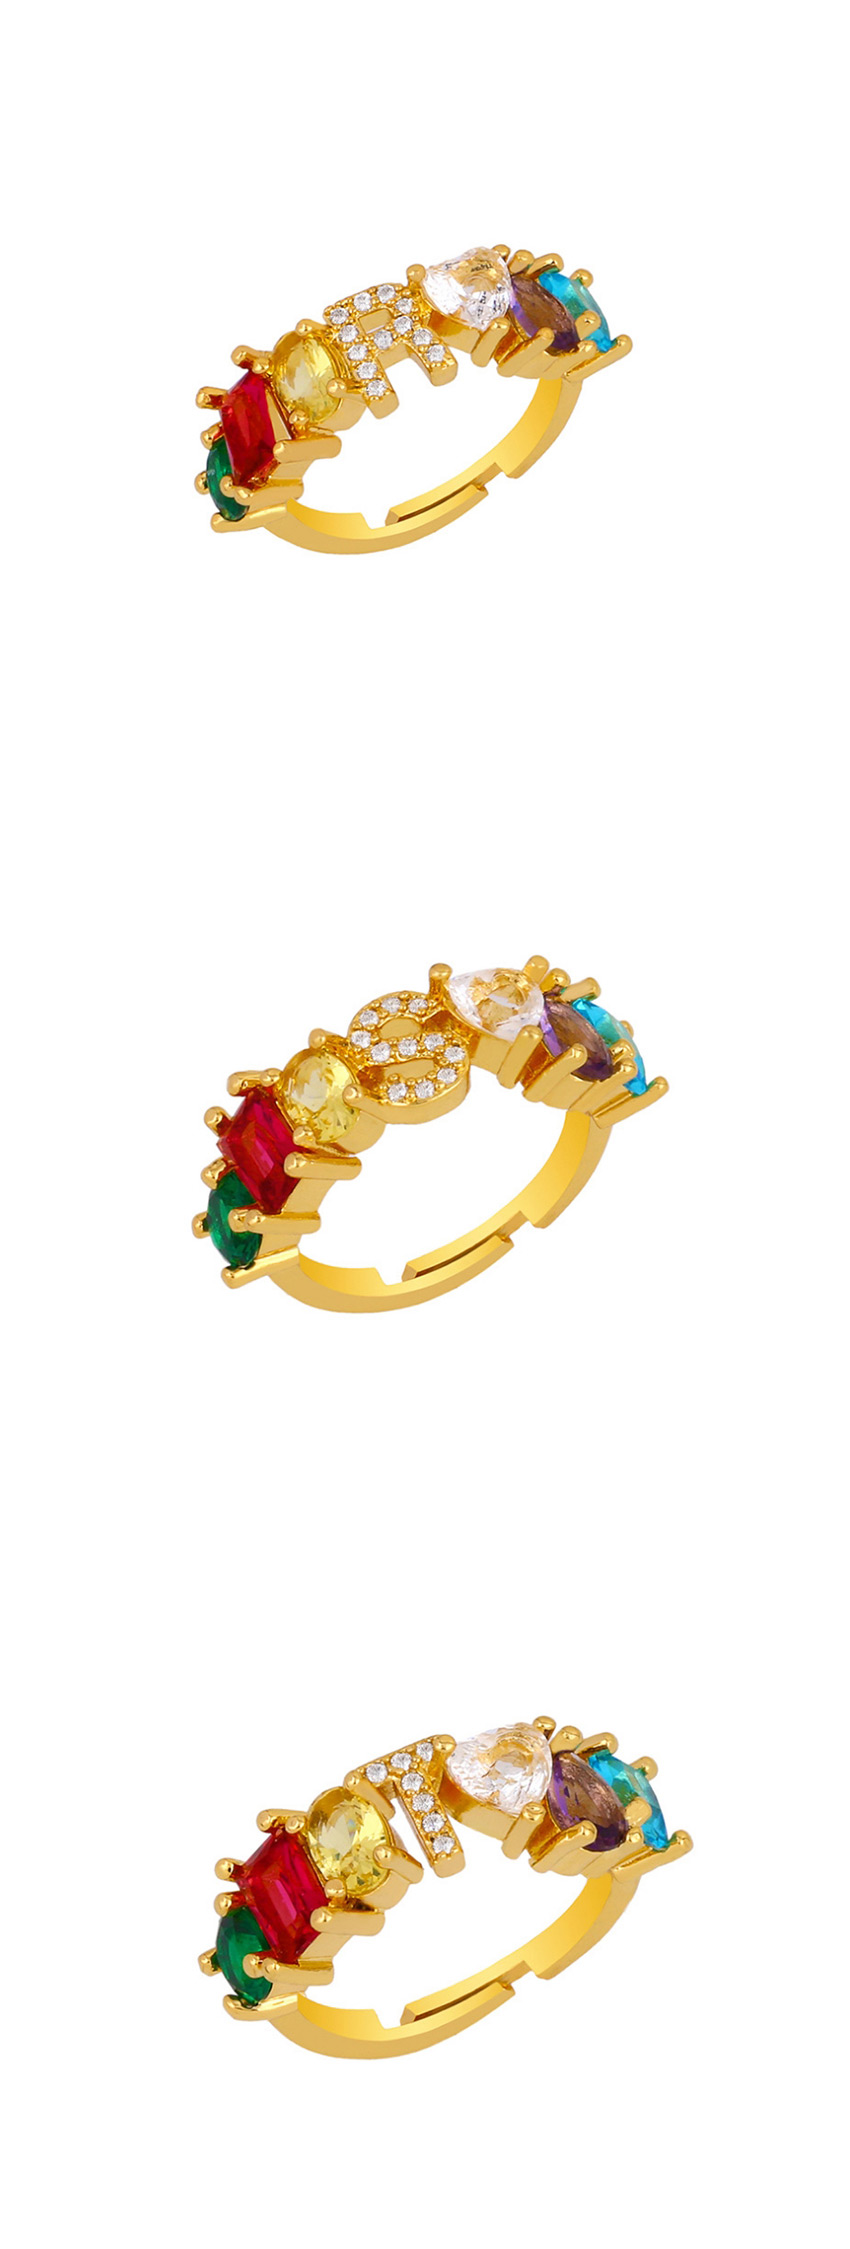 Fashion O Gold Heart-shaped Adjustable Ring With Colorful Diamond Letters,Rings